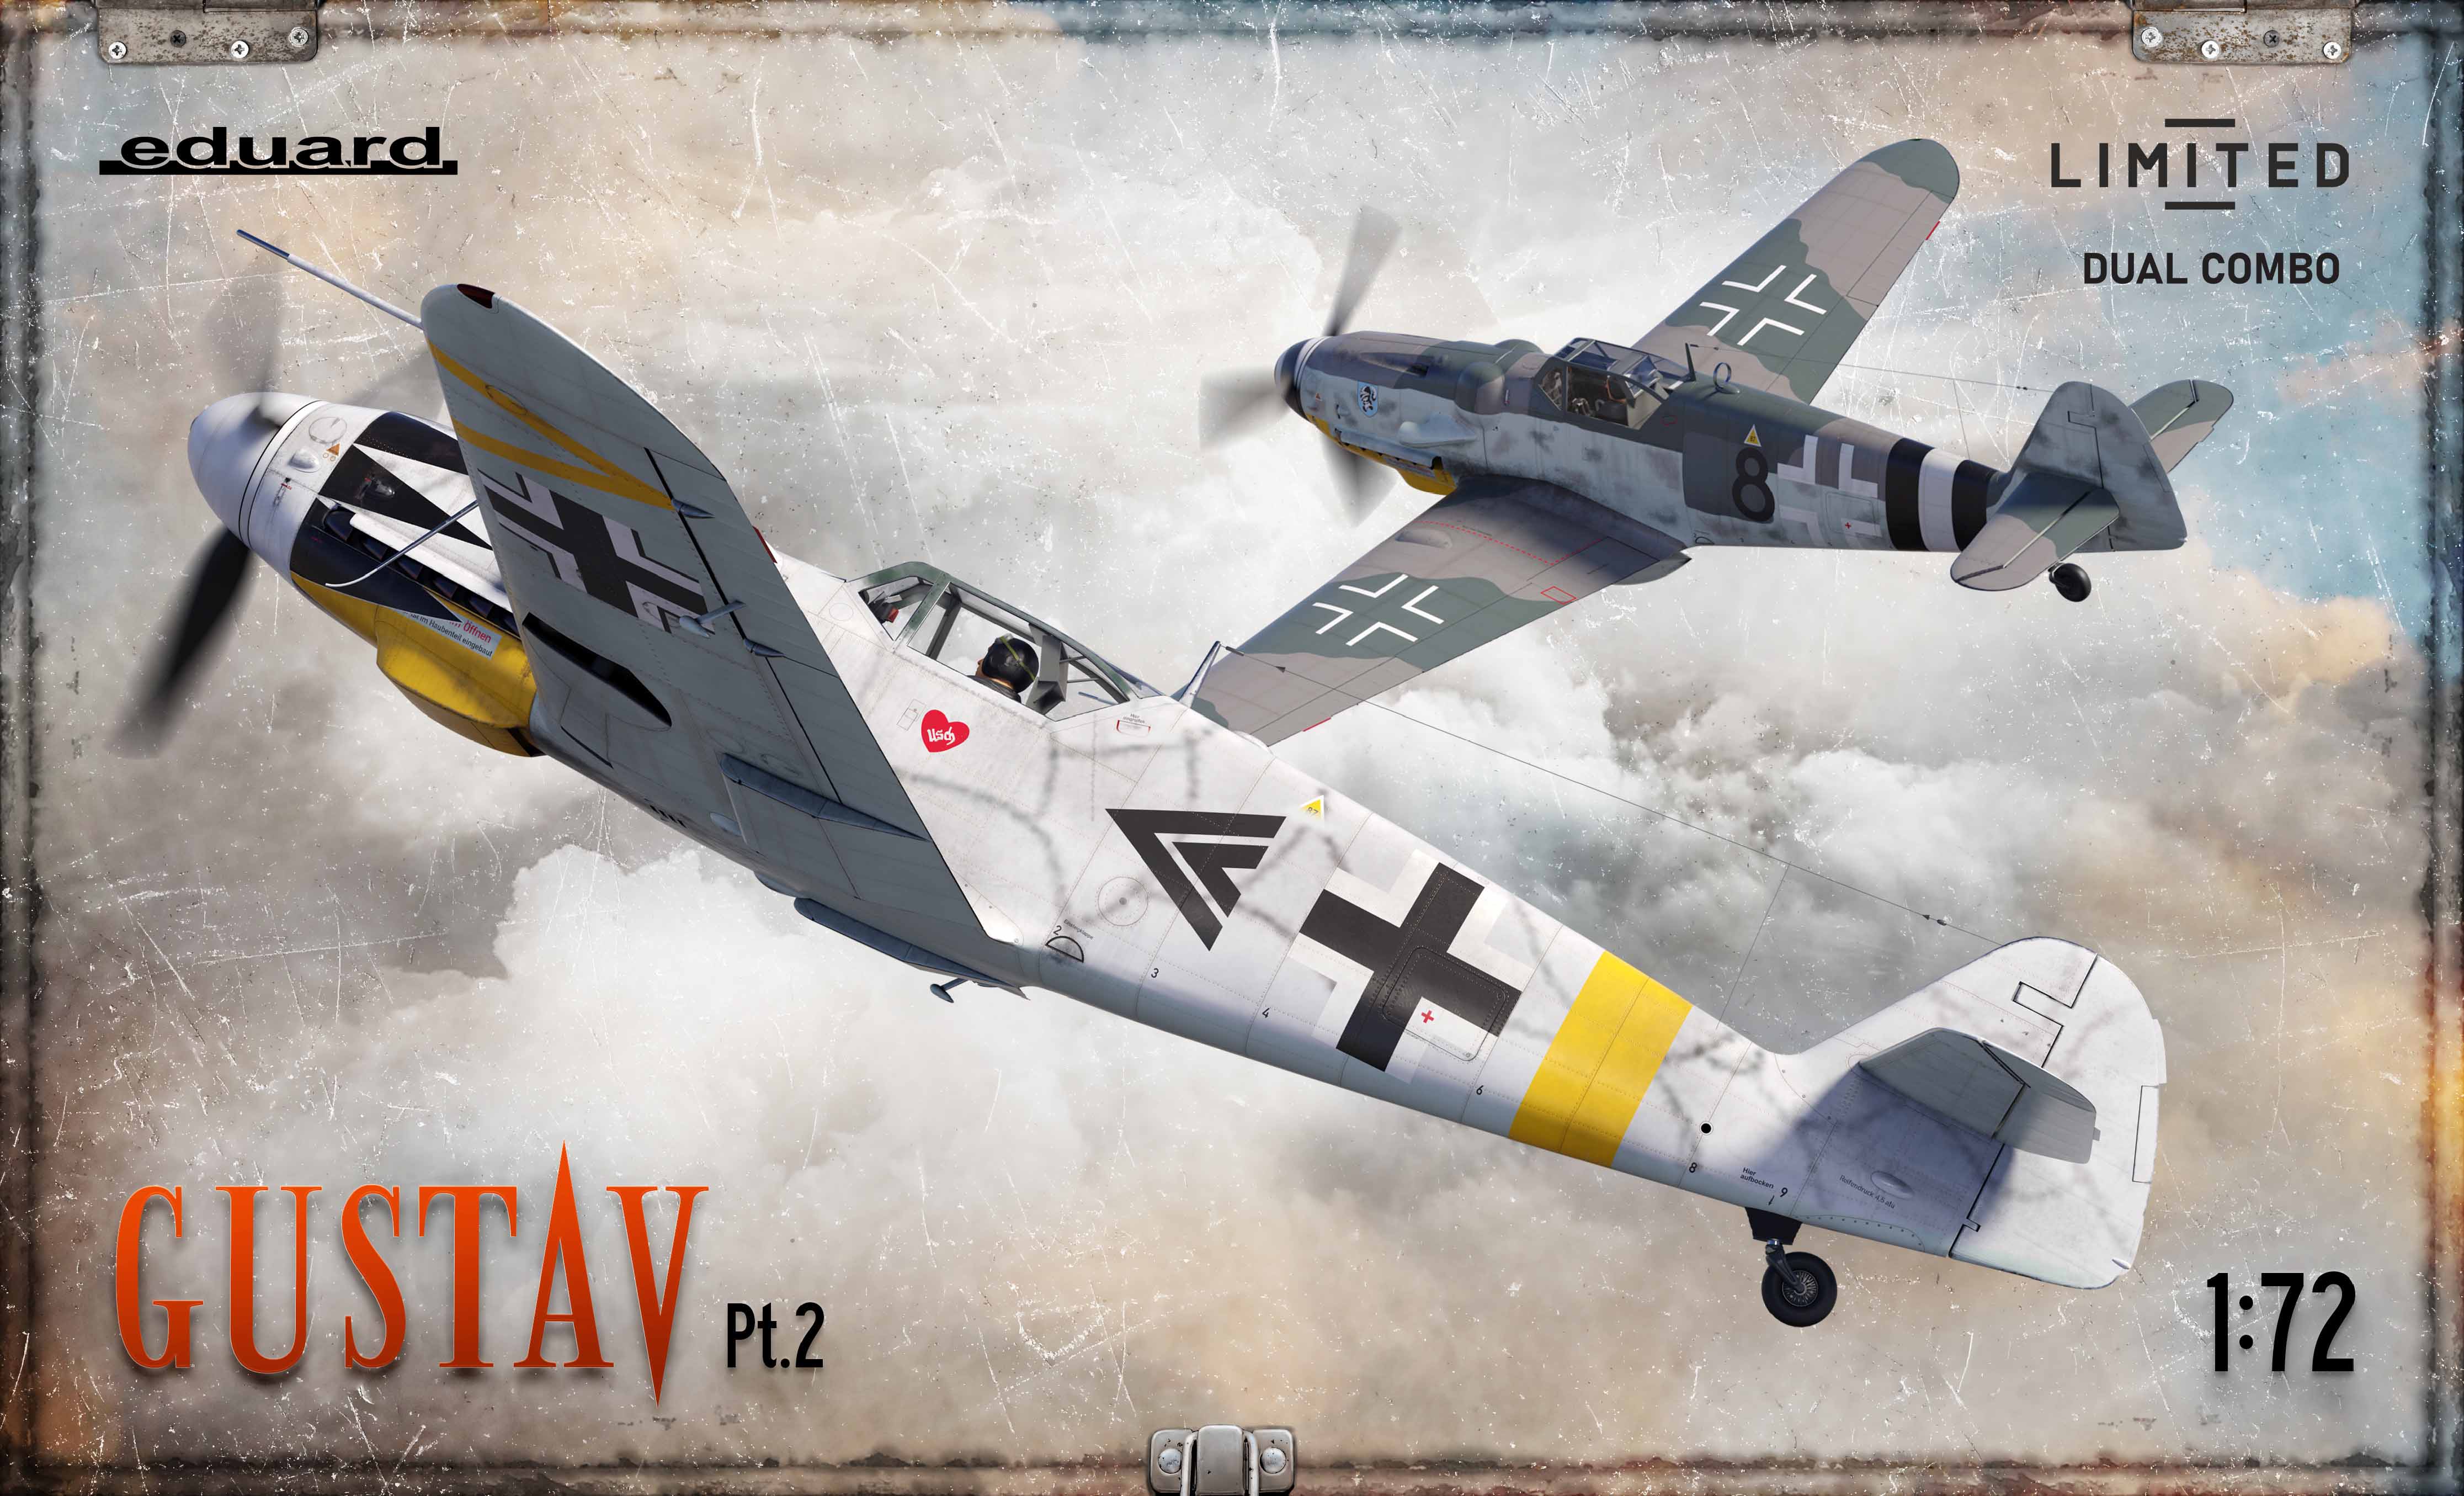 1/72 Bf 109G-6 late/G-14 "GUSTAV pt. 2" - Dual combo (Limited)